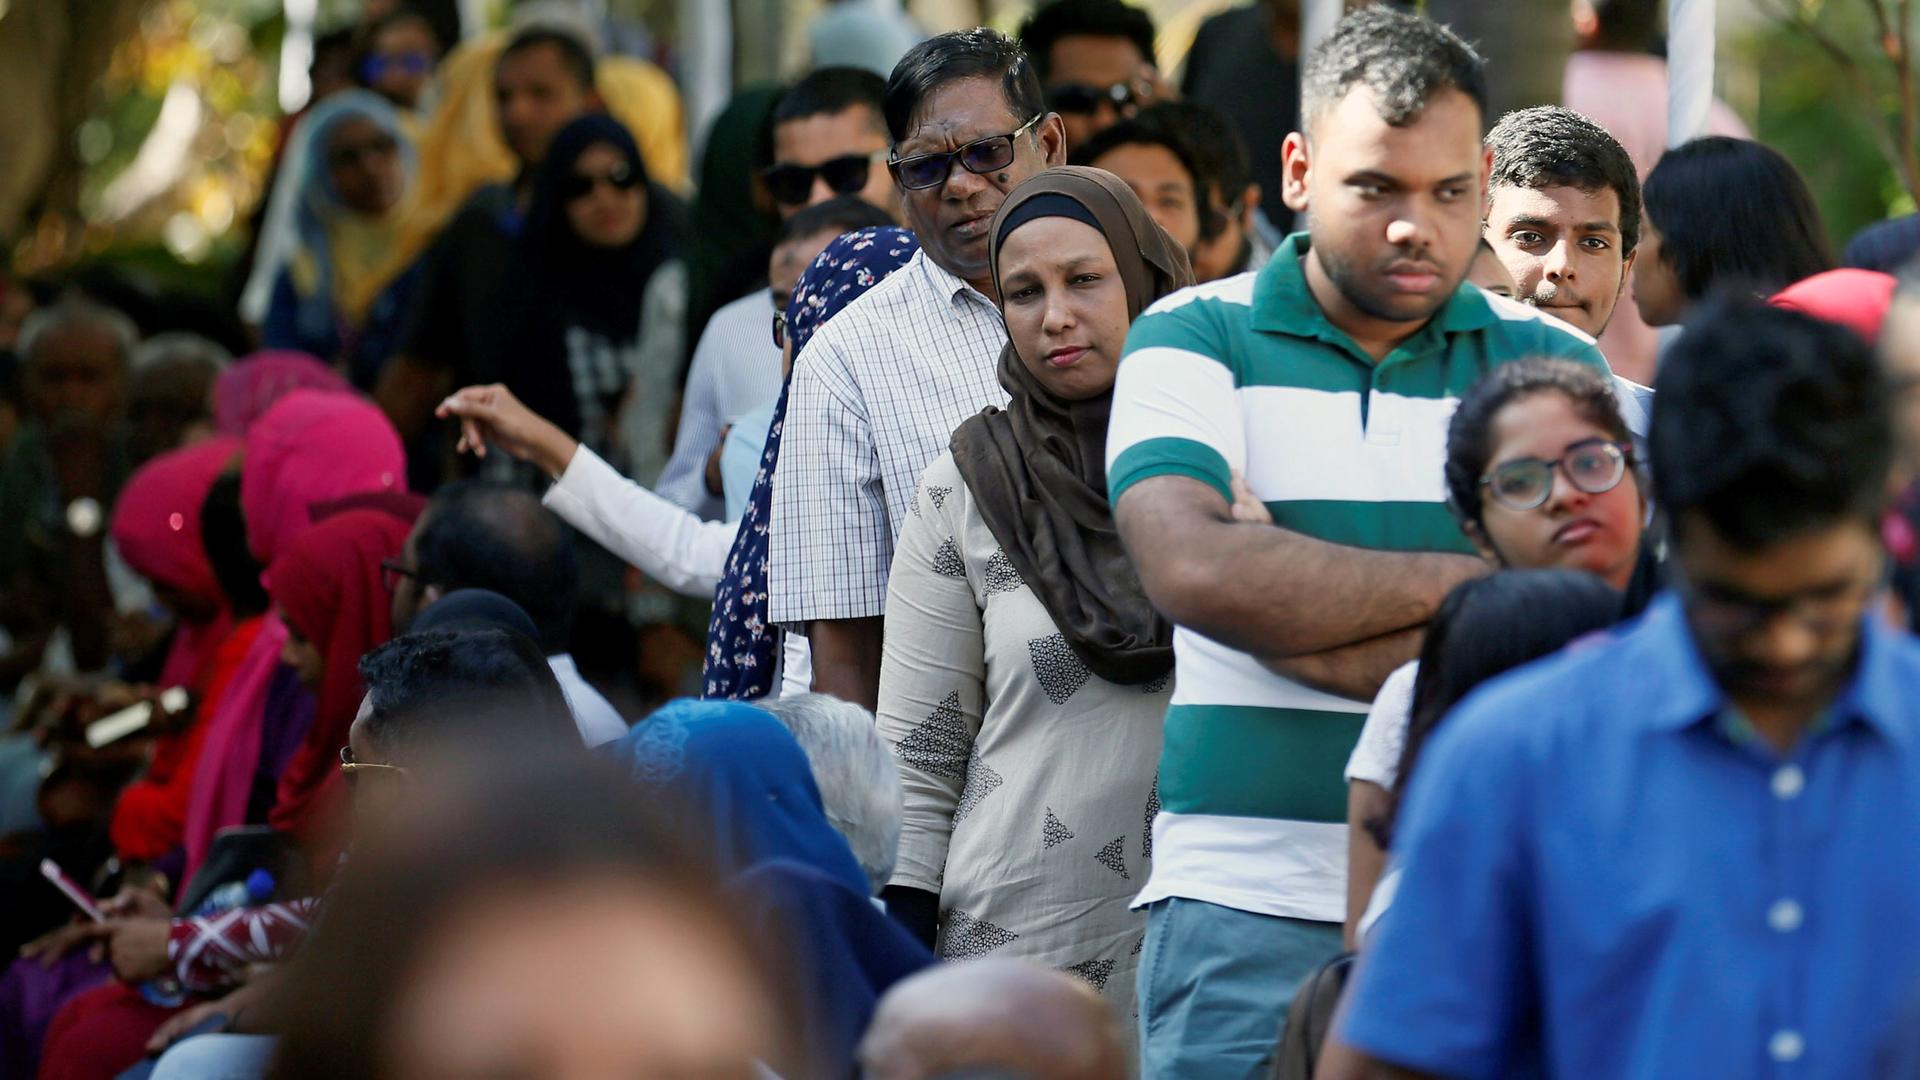 A crowd of people fill a street waiting on line to vote in Sri Lanka